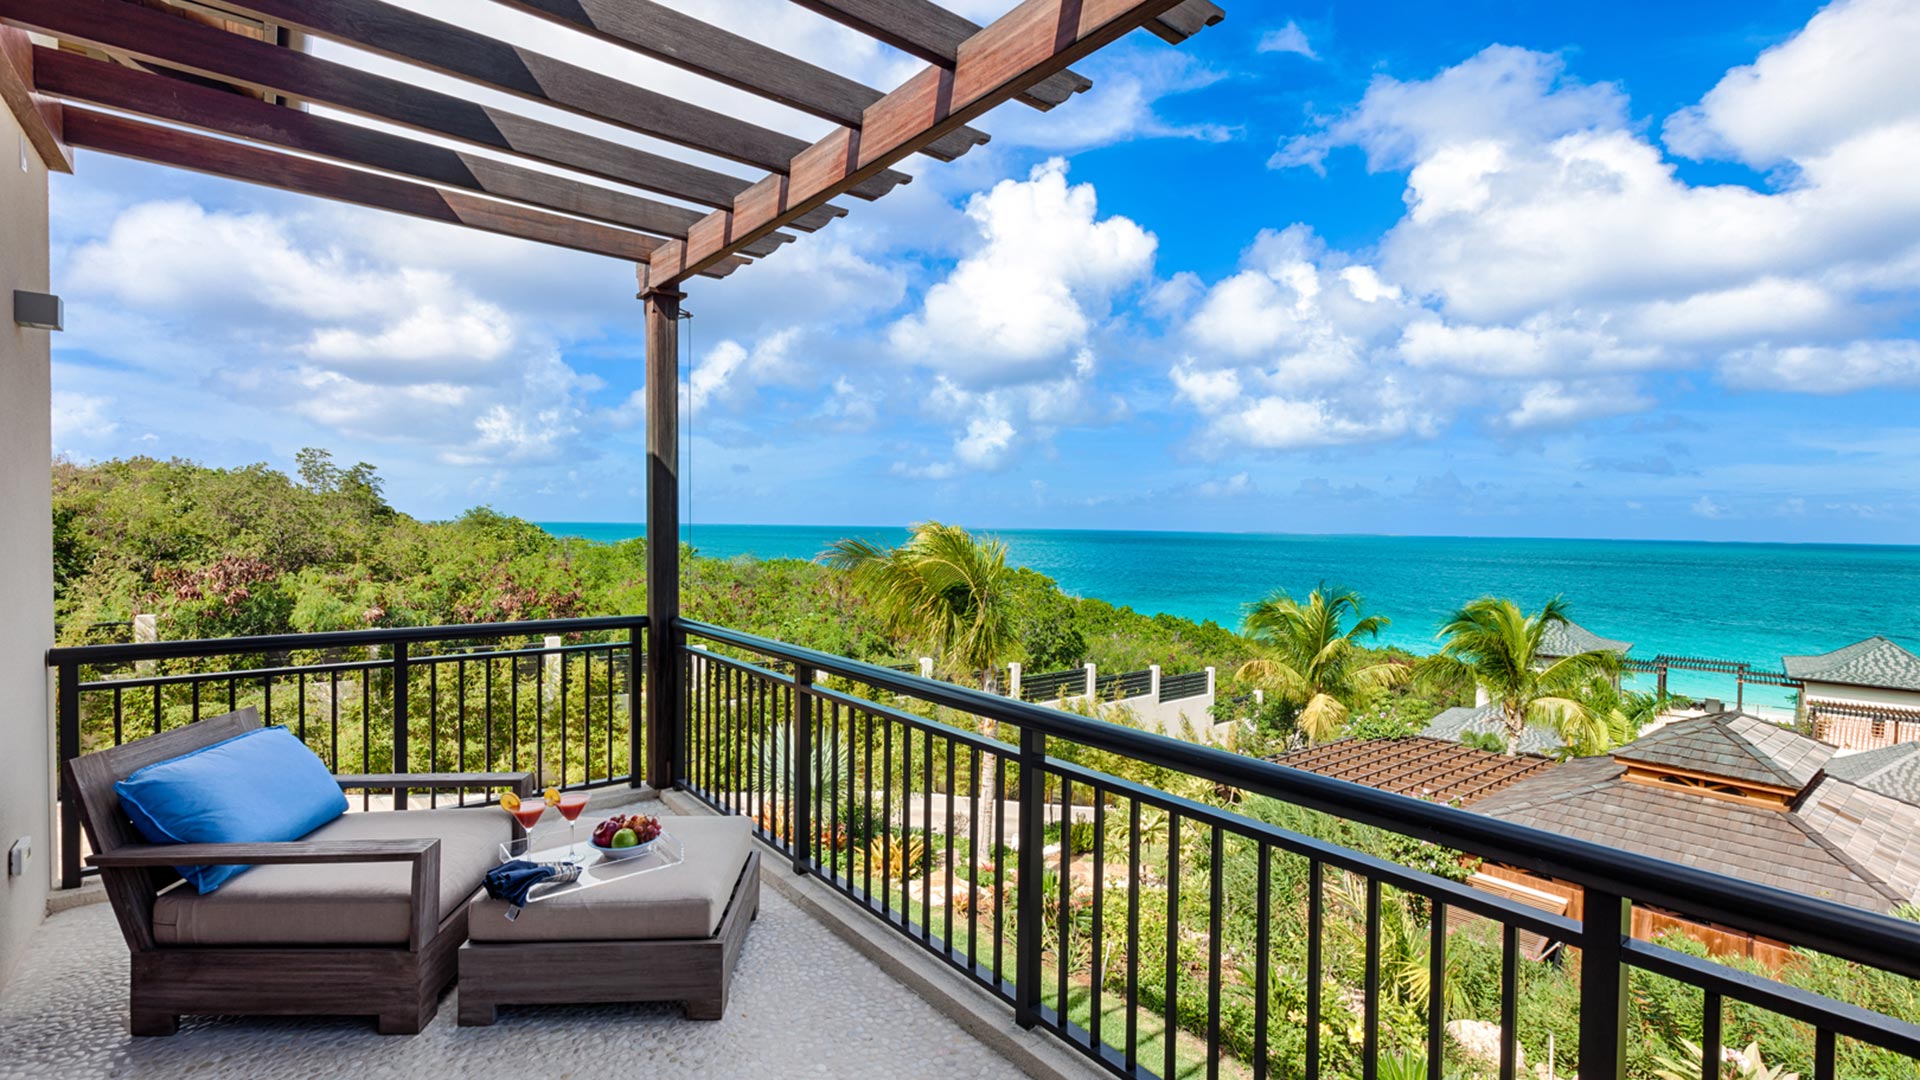 Even the Guest House offers stunning view of Anguilla's turquoise waters